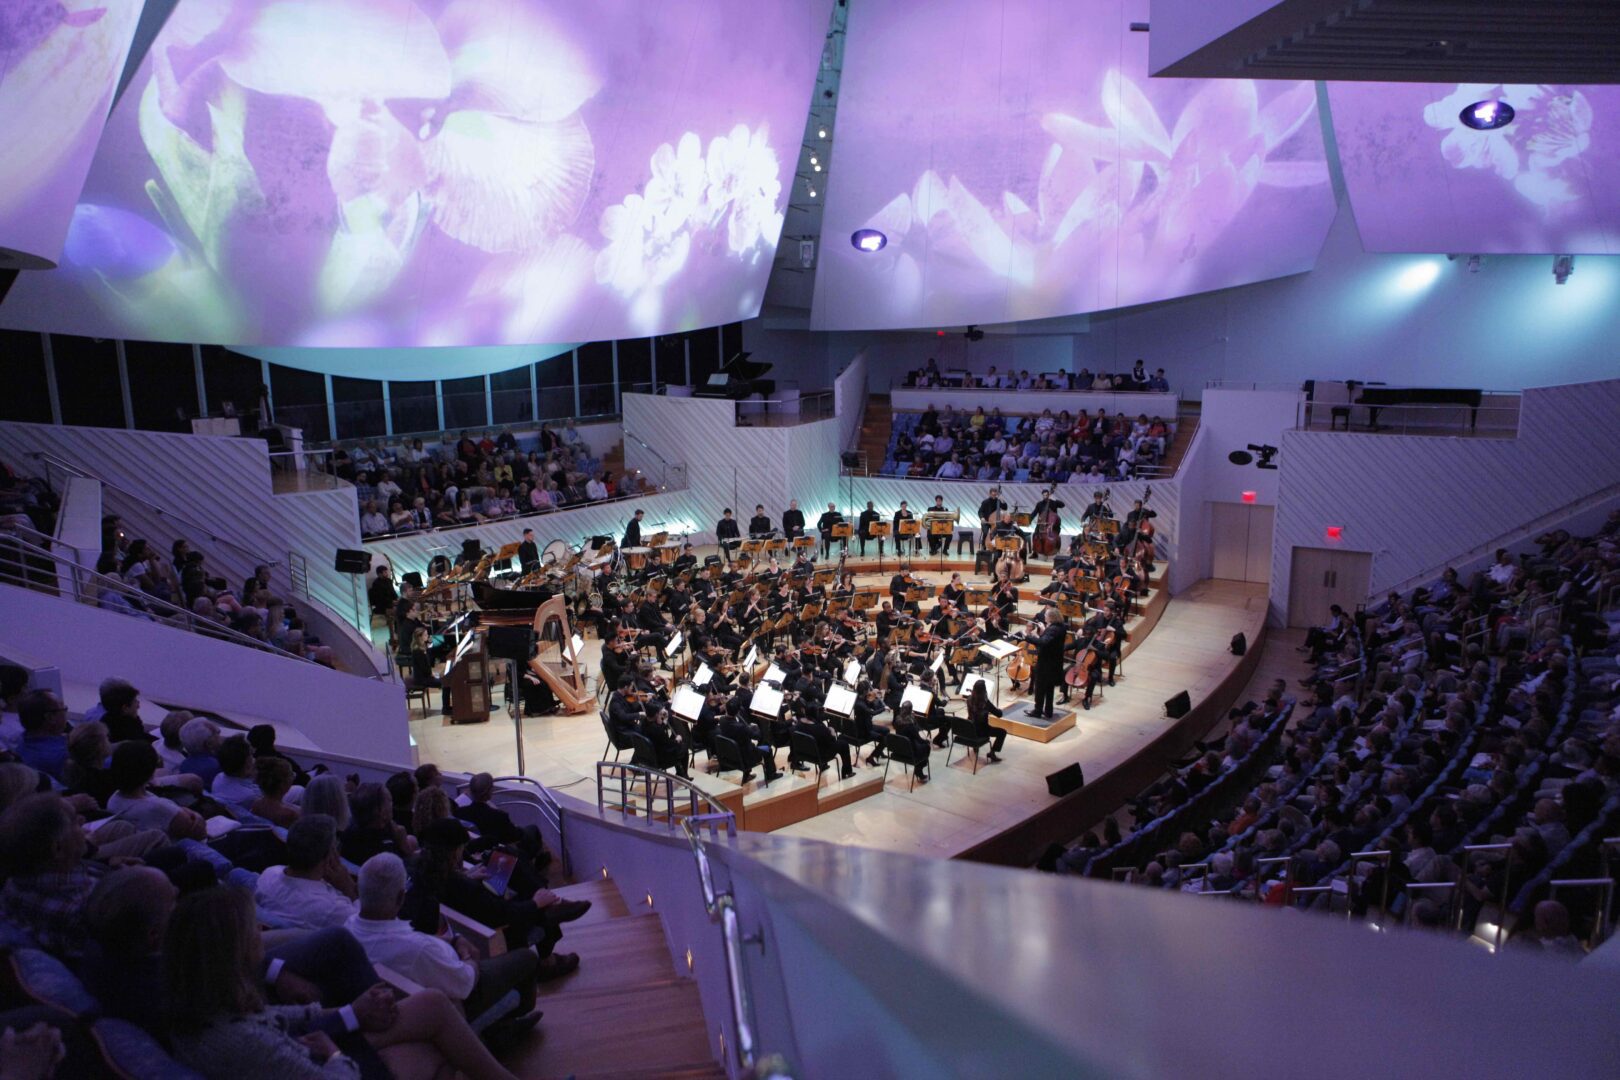 Symphony orchestra in a large auditorium with purple lighting.